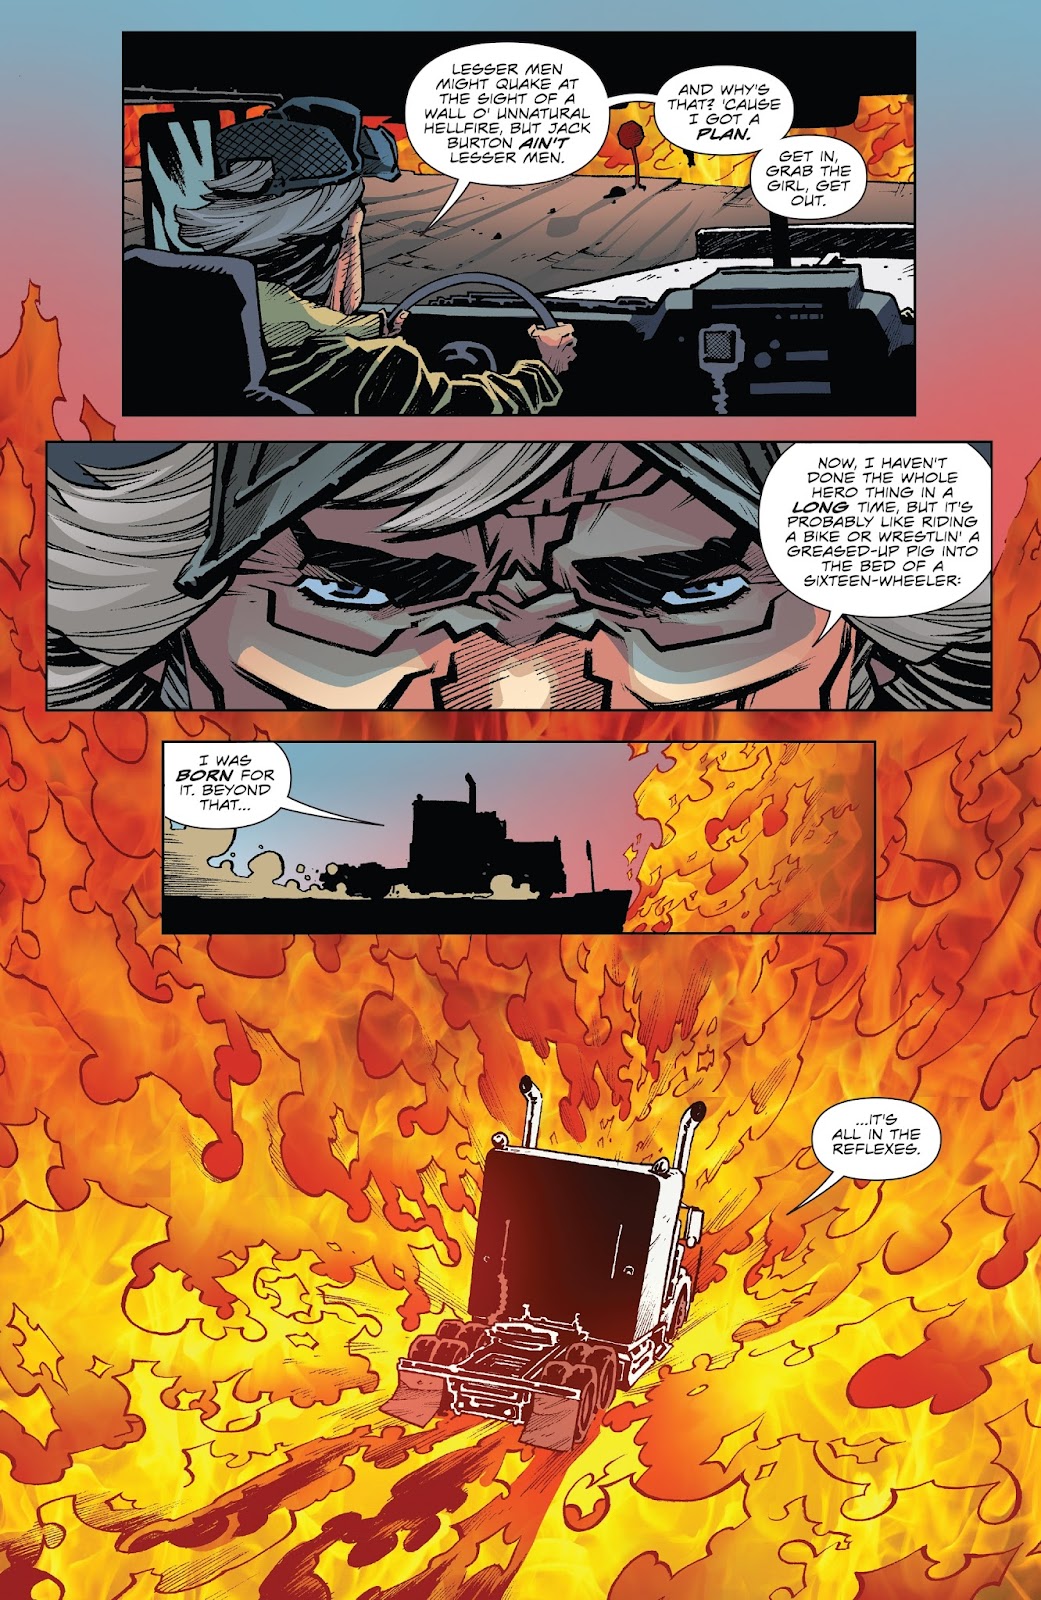 Big Trouble in Little China: Old Man Jack issue 1 - Page 11